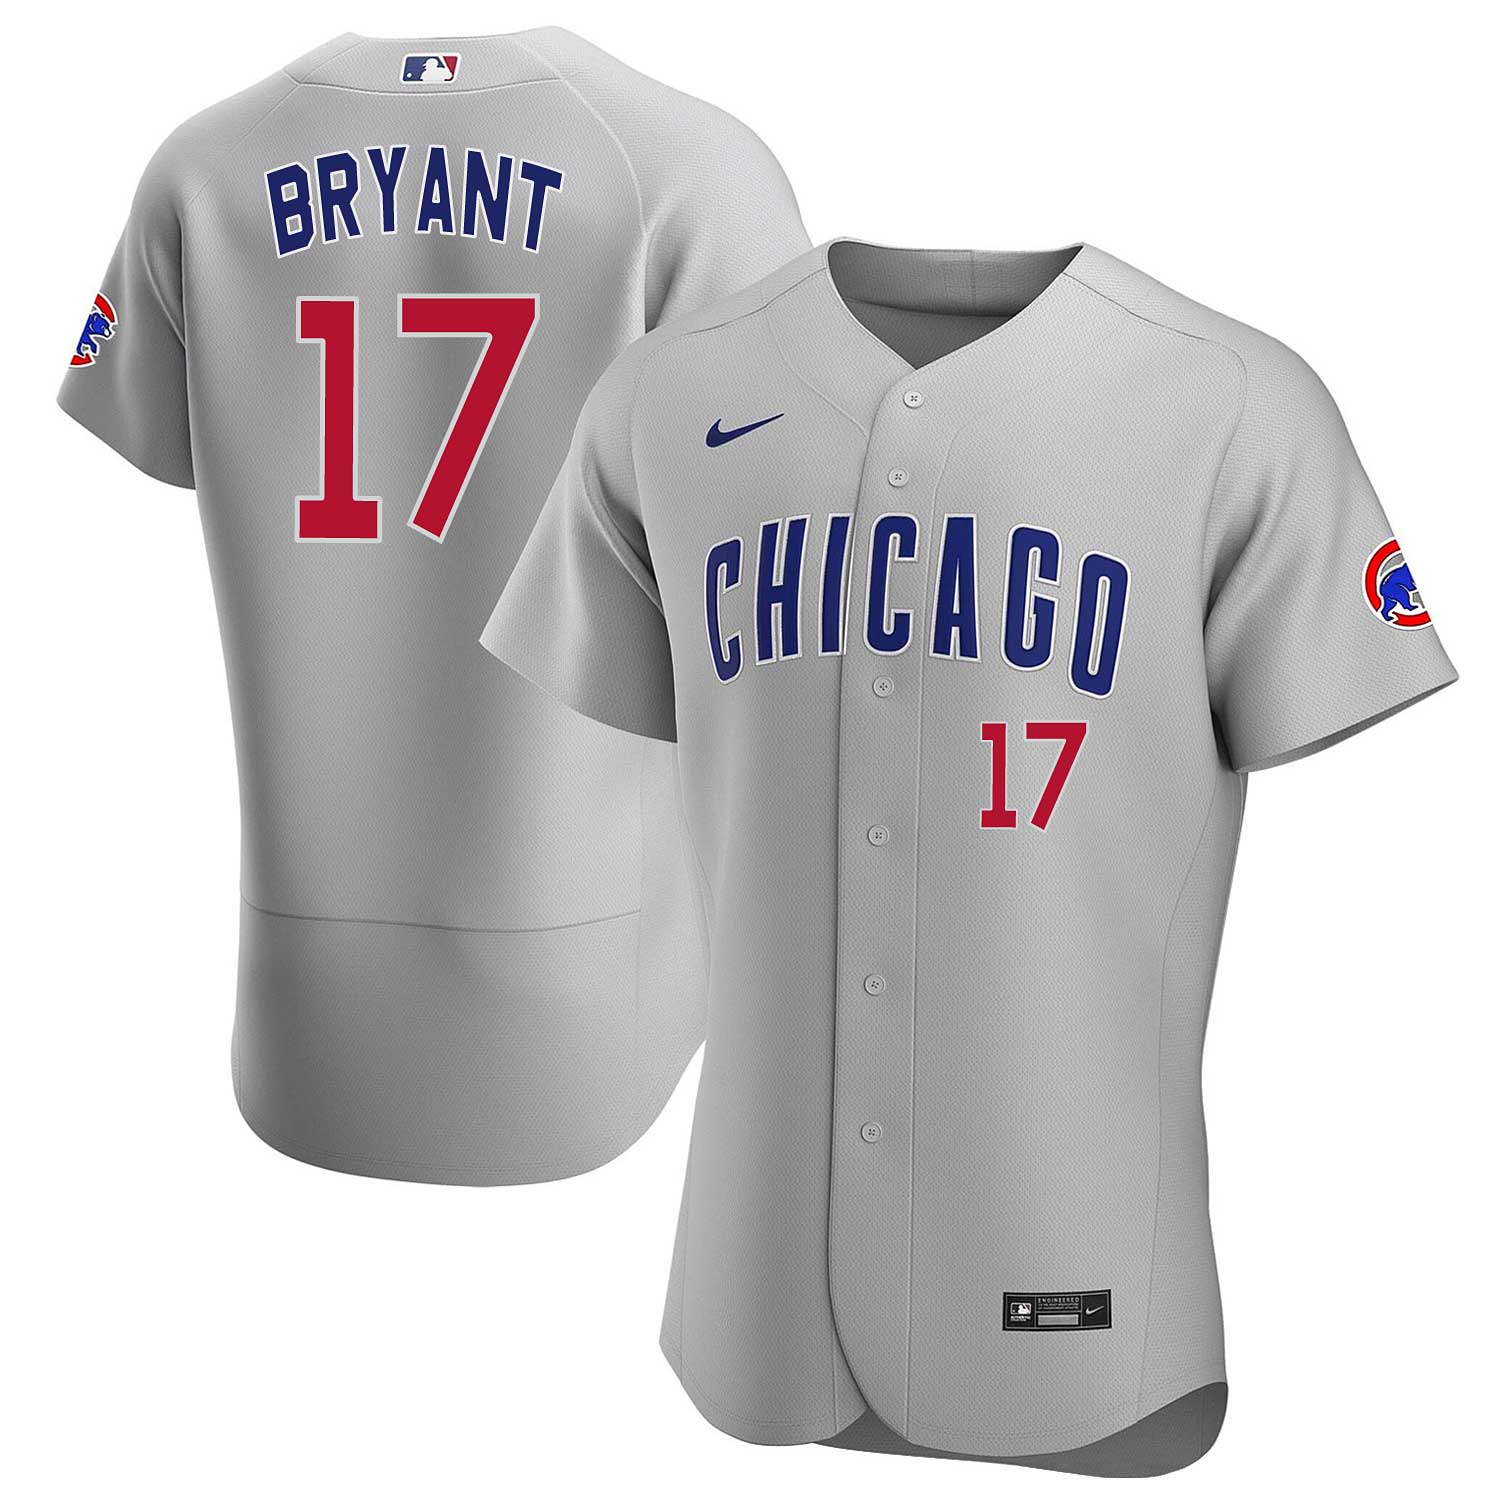 Chicago Cubs Kris Bryant Nike Road Authentic Jersey 44 = Medium / Large